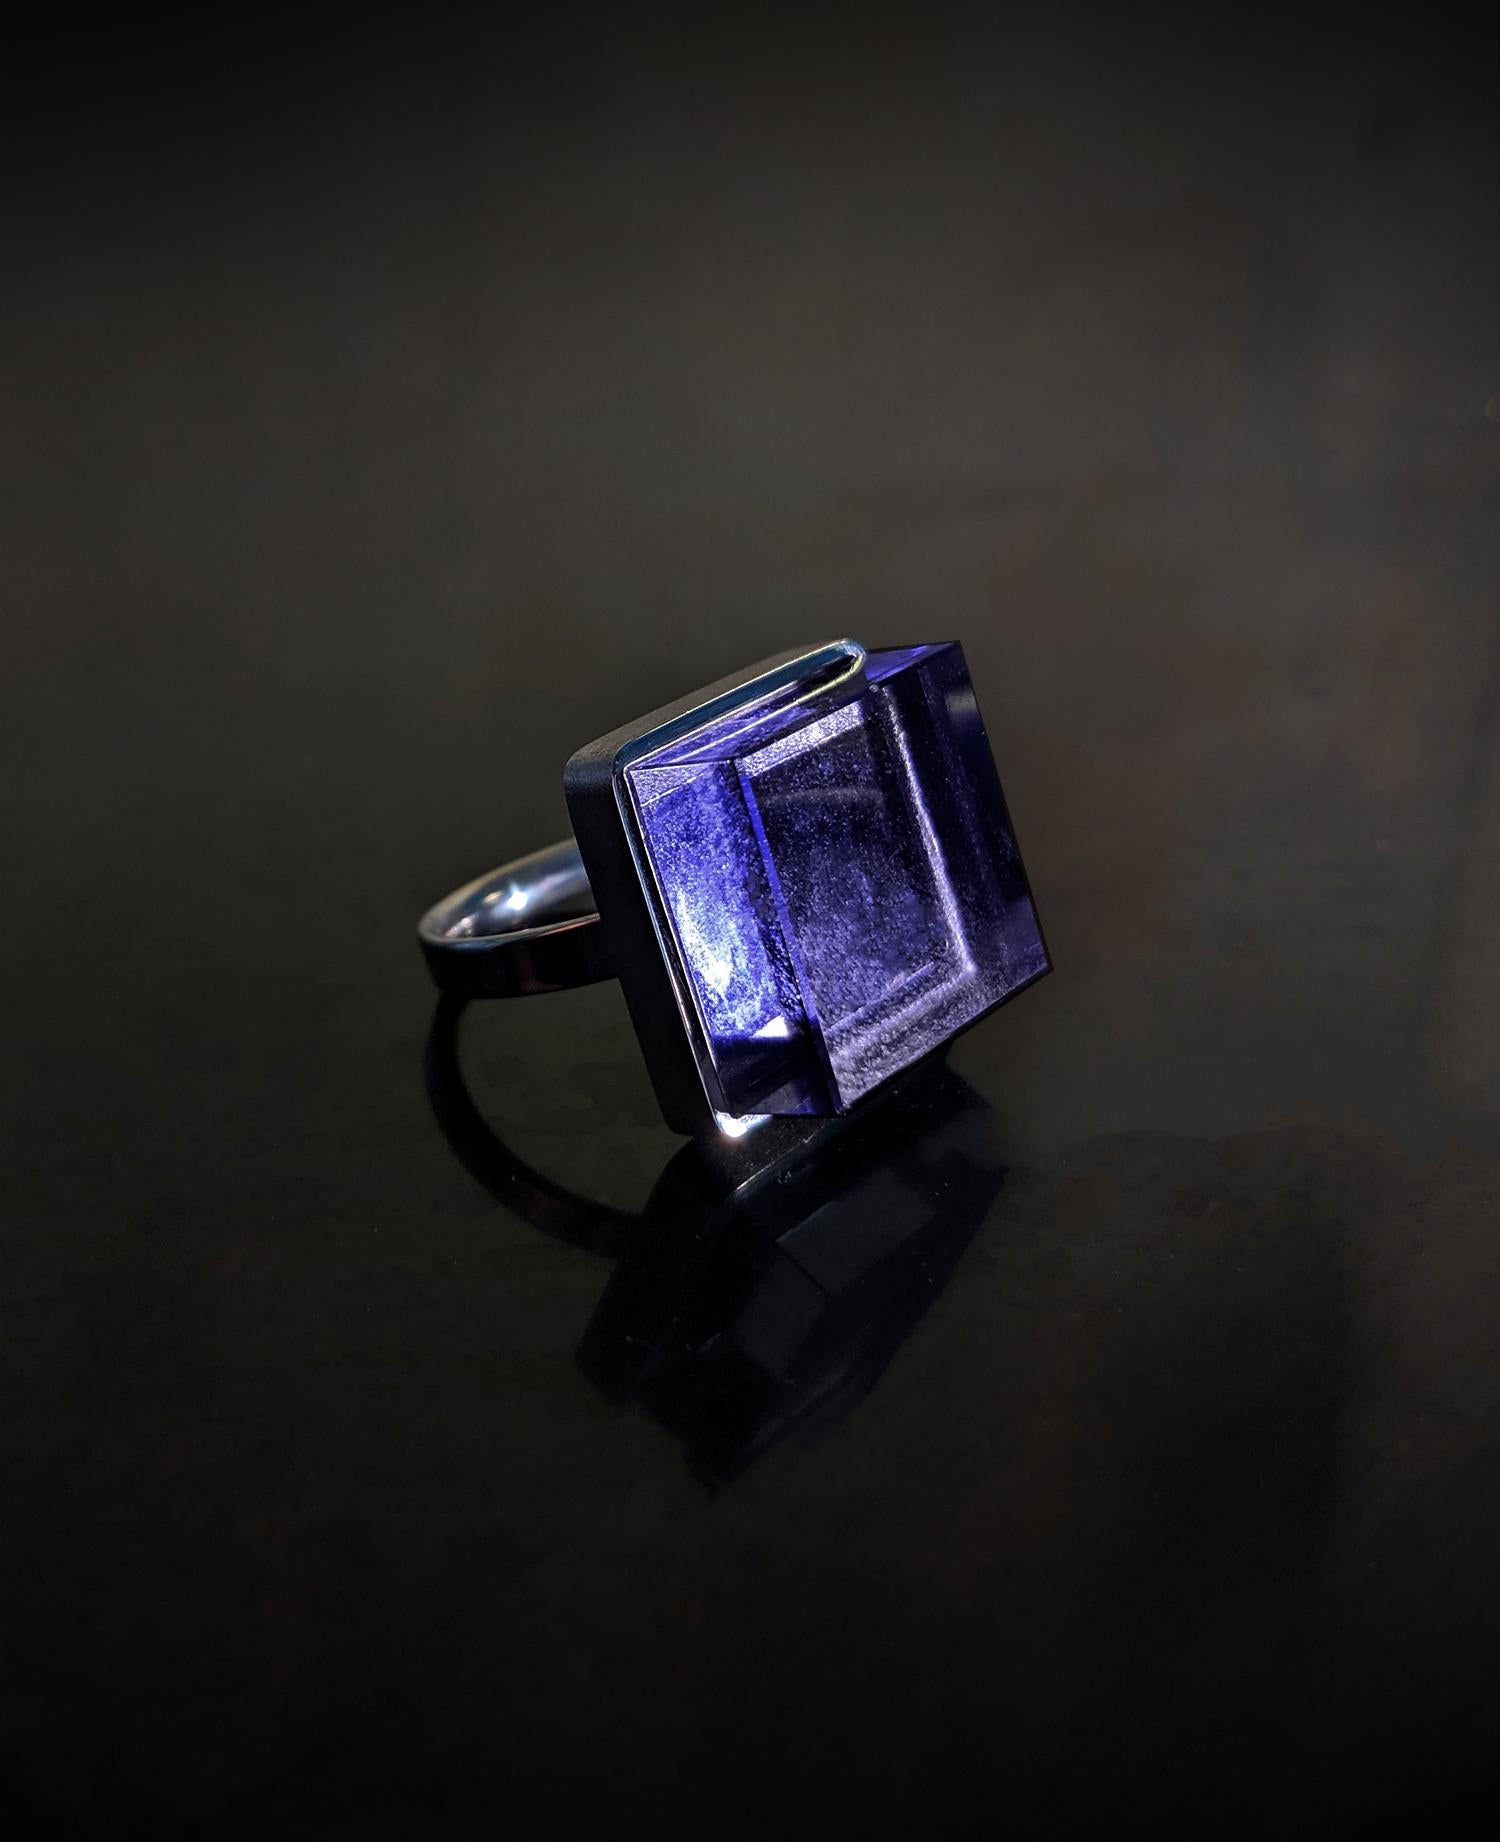 Mixed Cut White Gold Art Deco Style Ring with Vivid Amethyst Featured in Vogue For Sale